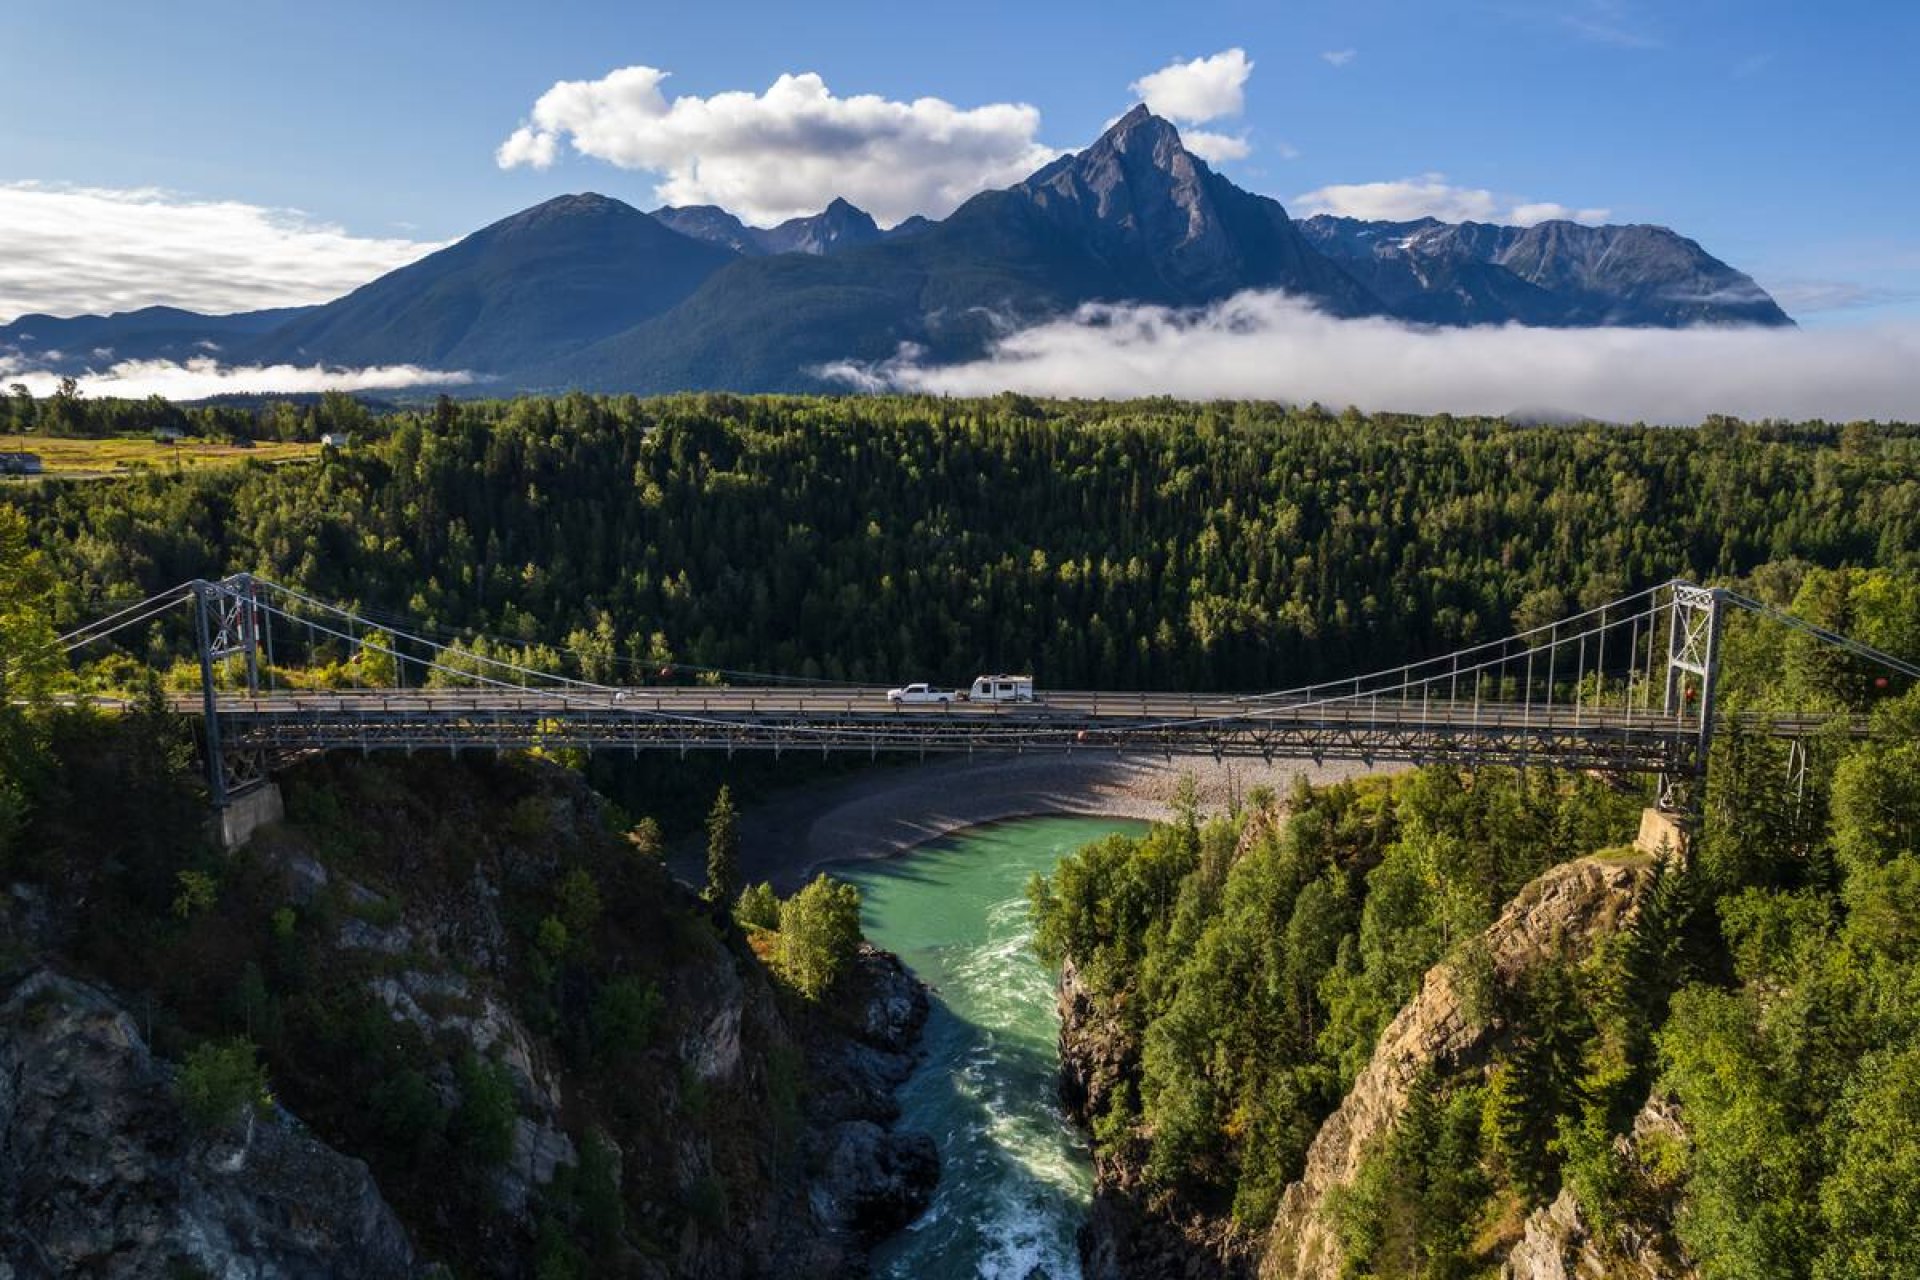 The revolution of sustainable tourism in Northern British Columbia